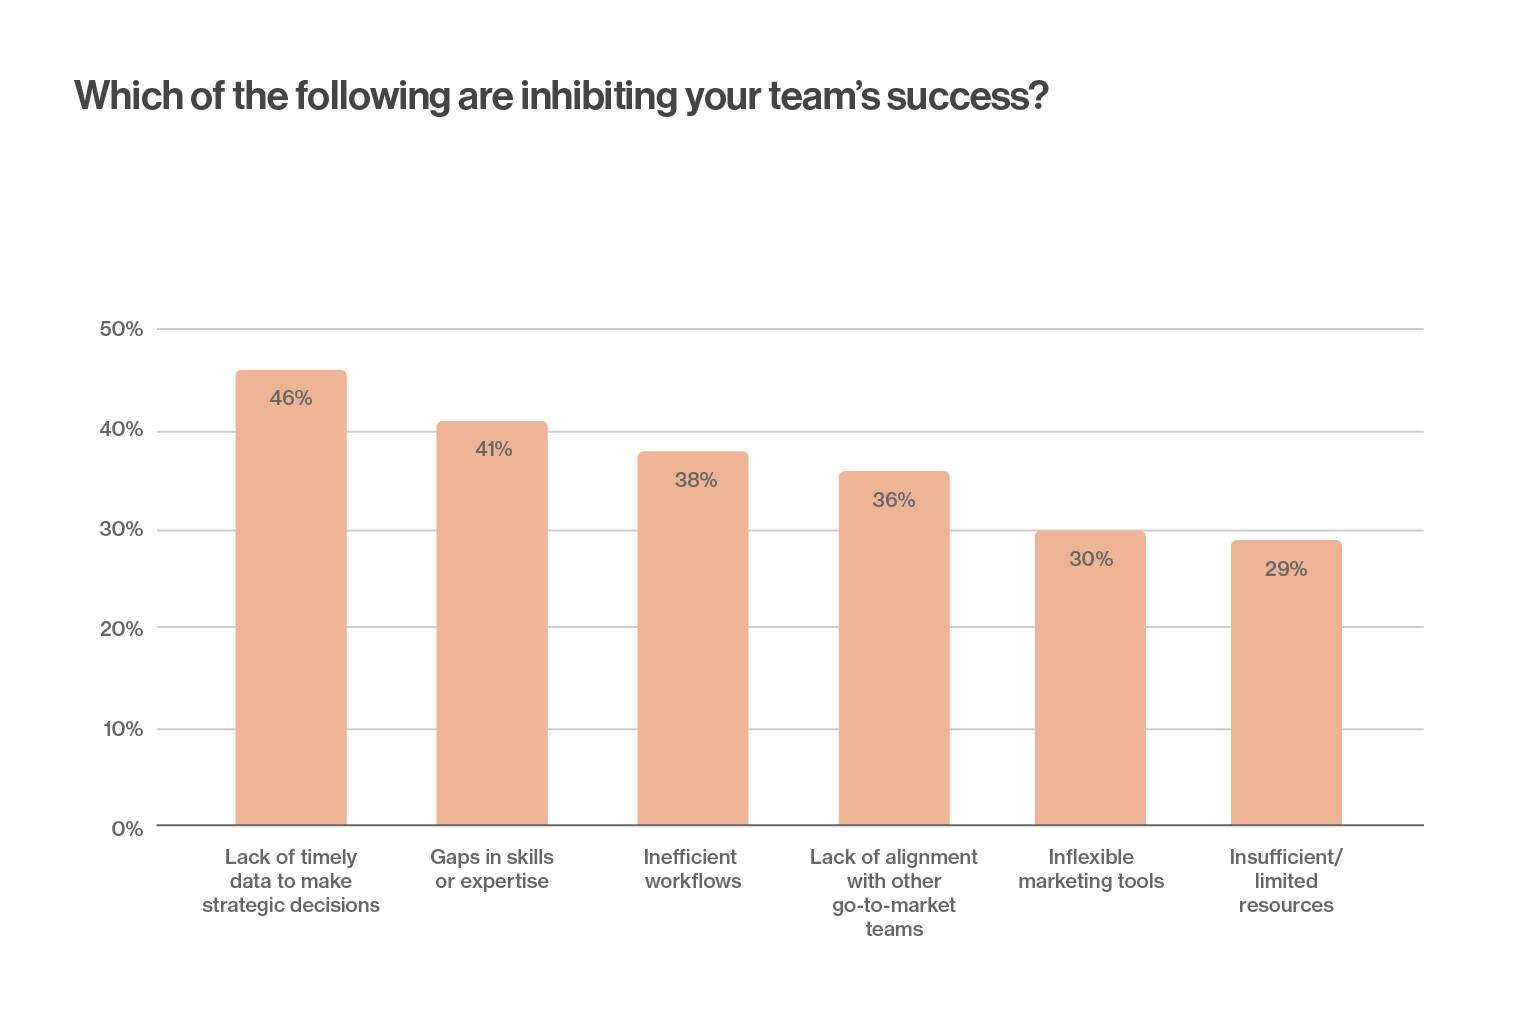 Survey question that reads: Which of the following are inhibiting your team's success? Answer breakdown: 46% - Lack of timely data to make strategic decisions; 41% - Gaps in skills or expertise; 38% - Inefficient workflows; 36% - Lack of alignment with other go-to-market teams; 30% - Inflexible/non-user-friendly marketing tools; 39% - Insufficient/limited resources (budget, staff); 9% - None of these 